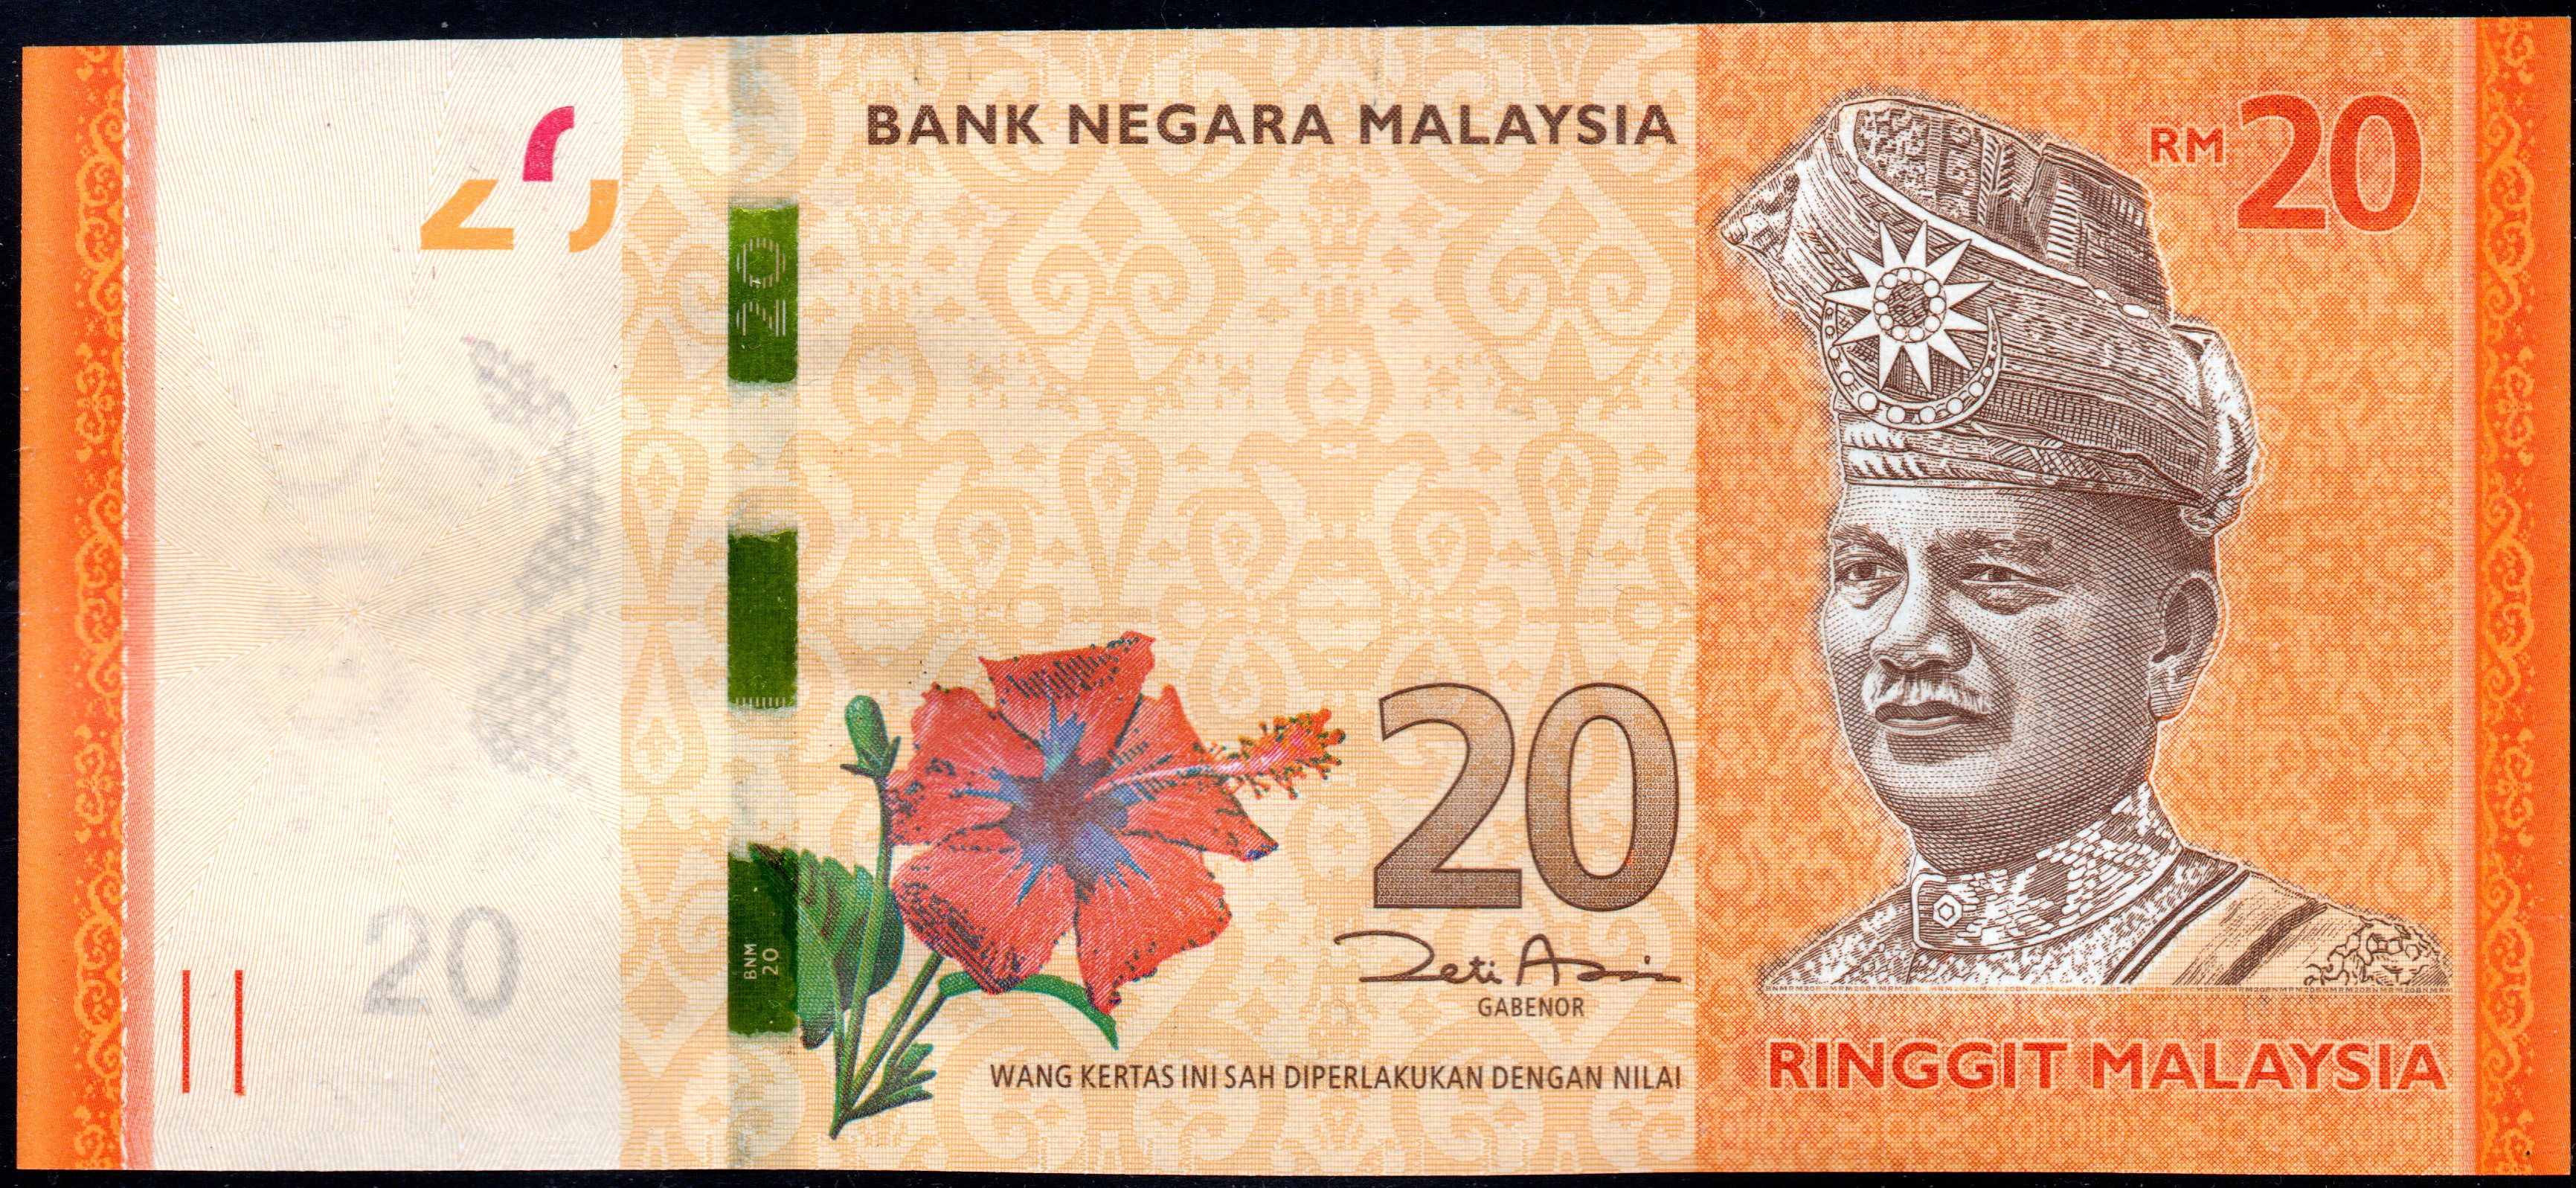 2011 MALAYSIA 20 RINGGIT P-54* UNC> > > > > > >HAWKSBILL TURTLES ZC REPLACEMENT 